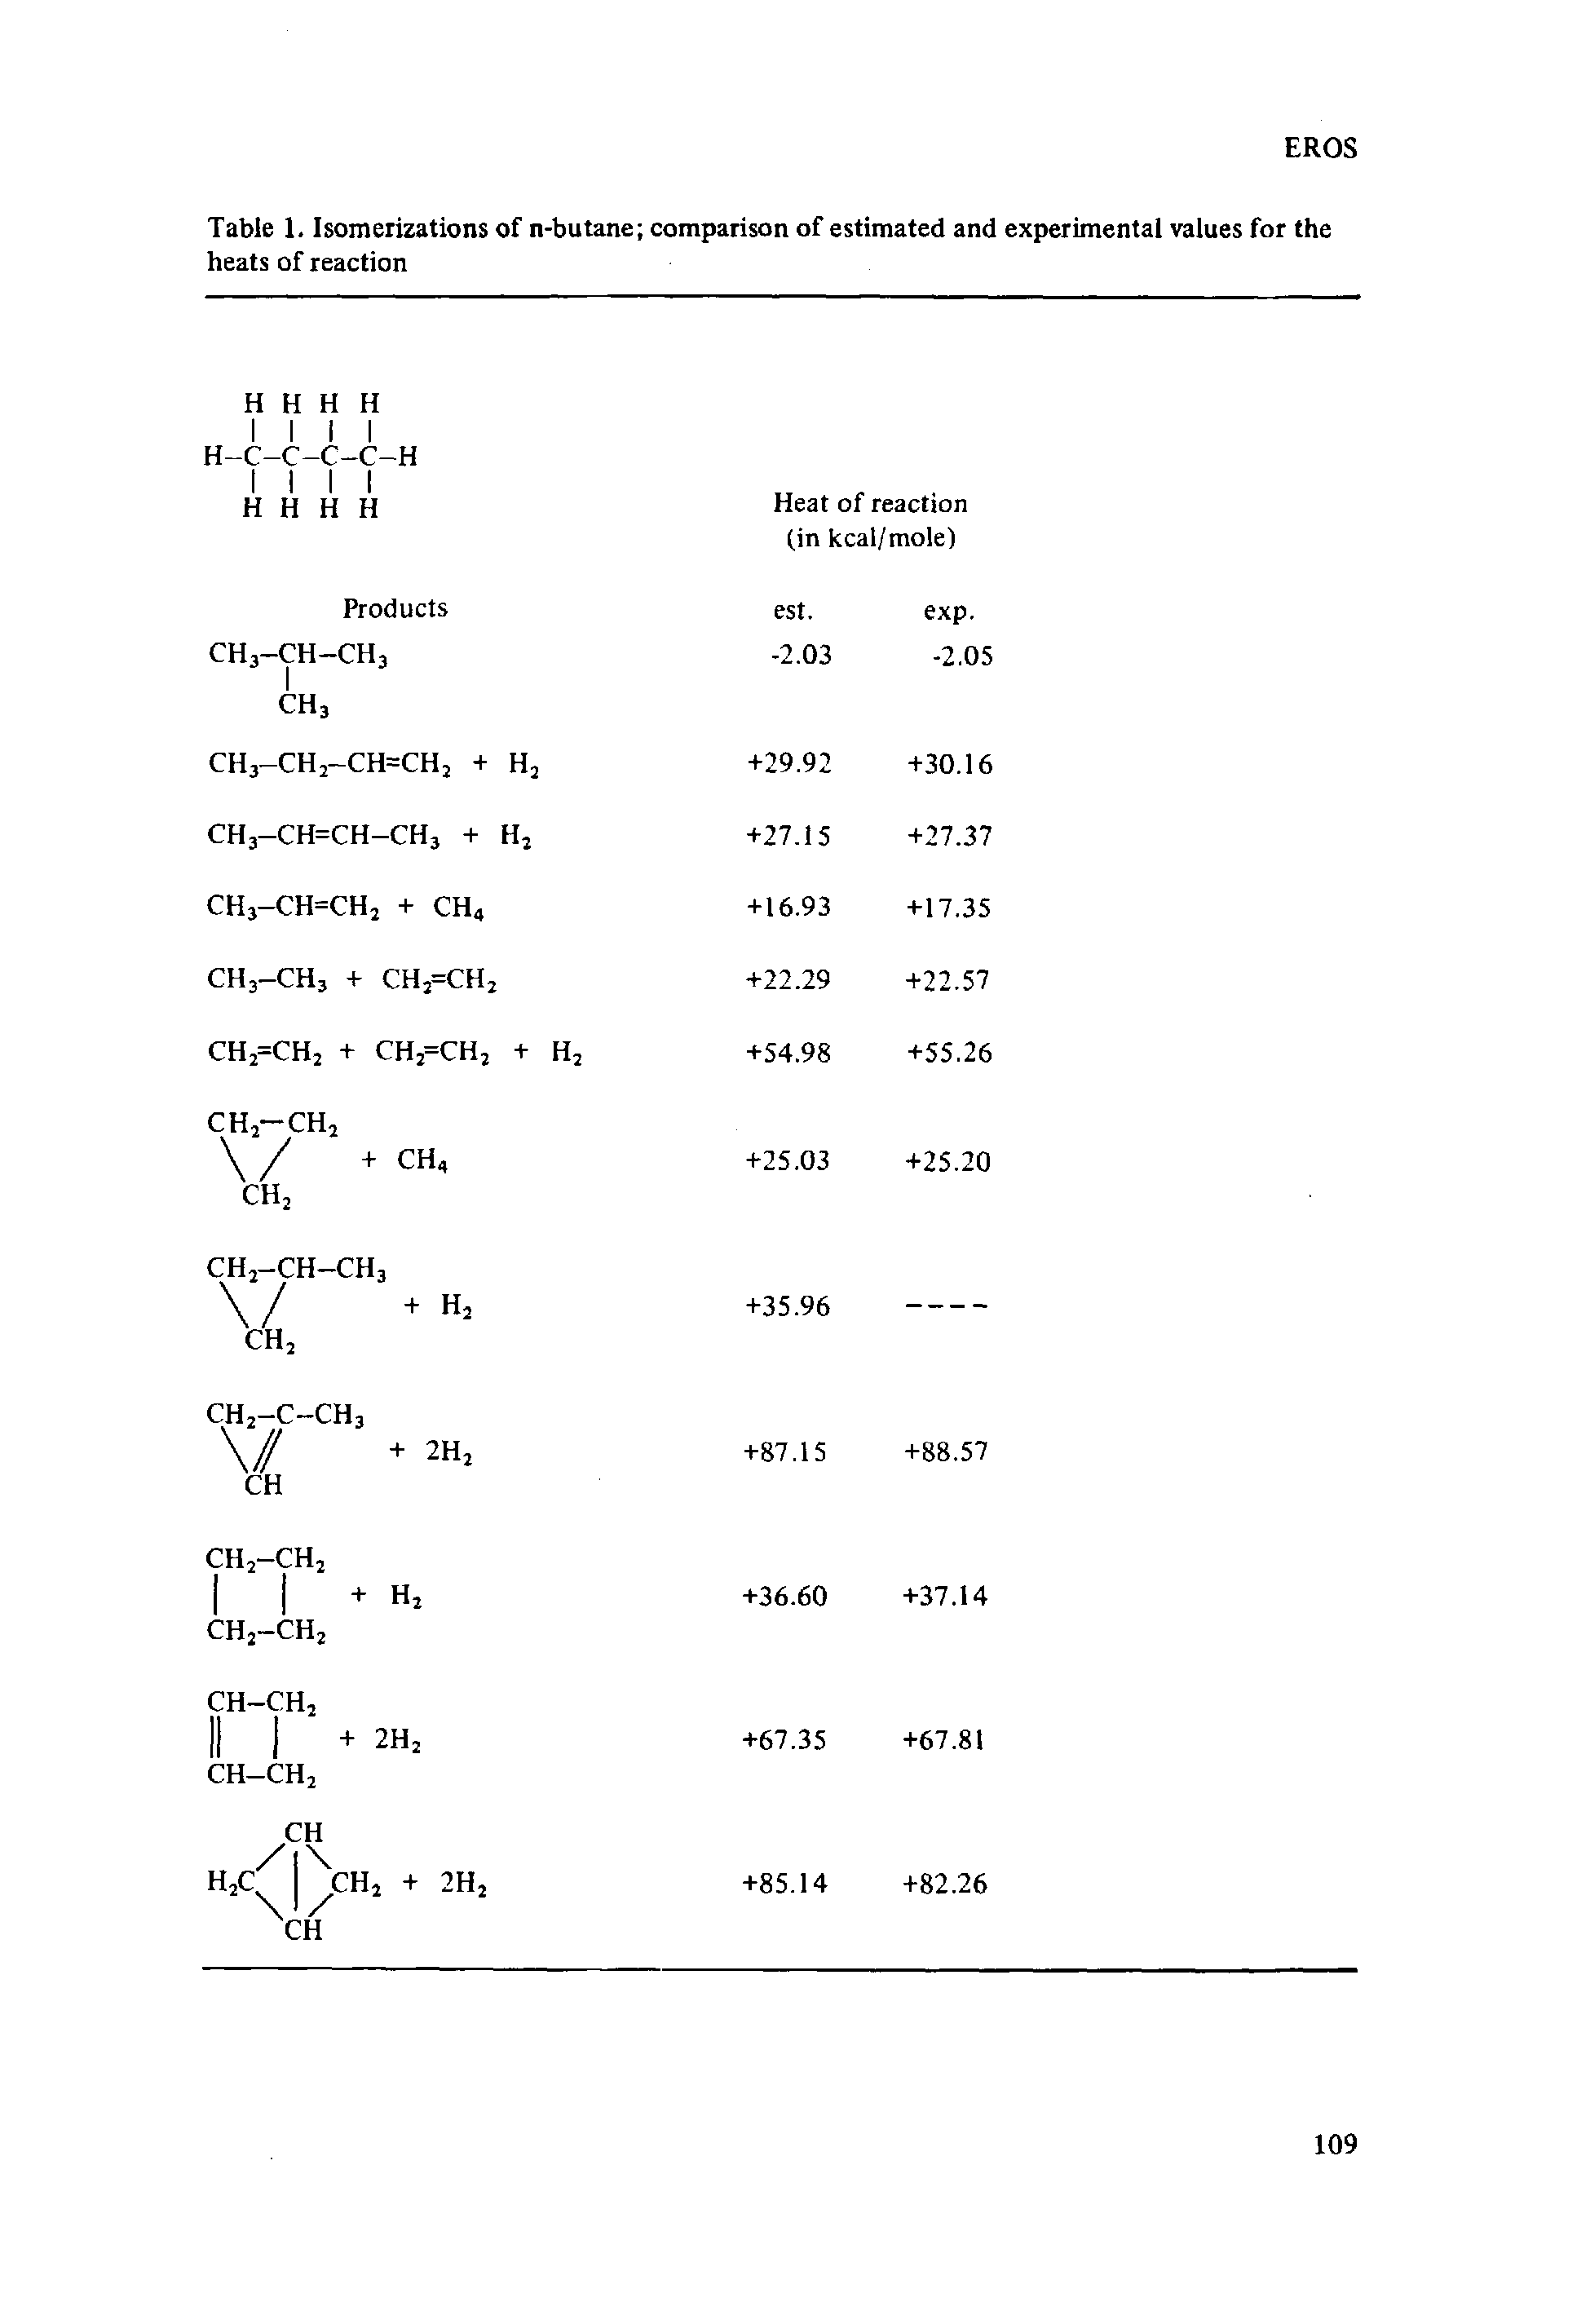 Table 1. Isomerizations of n-butane comparison of estimated and experimental values for the heats of reaction...